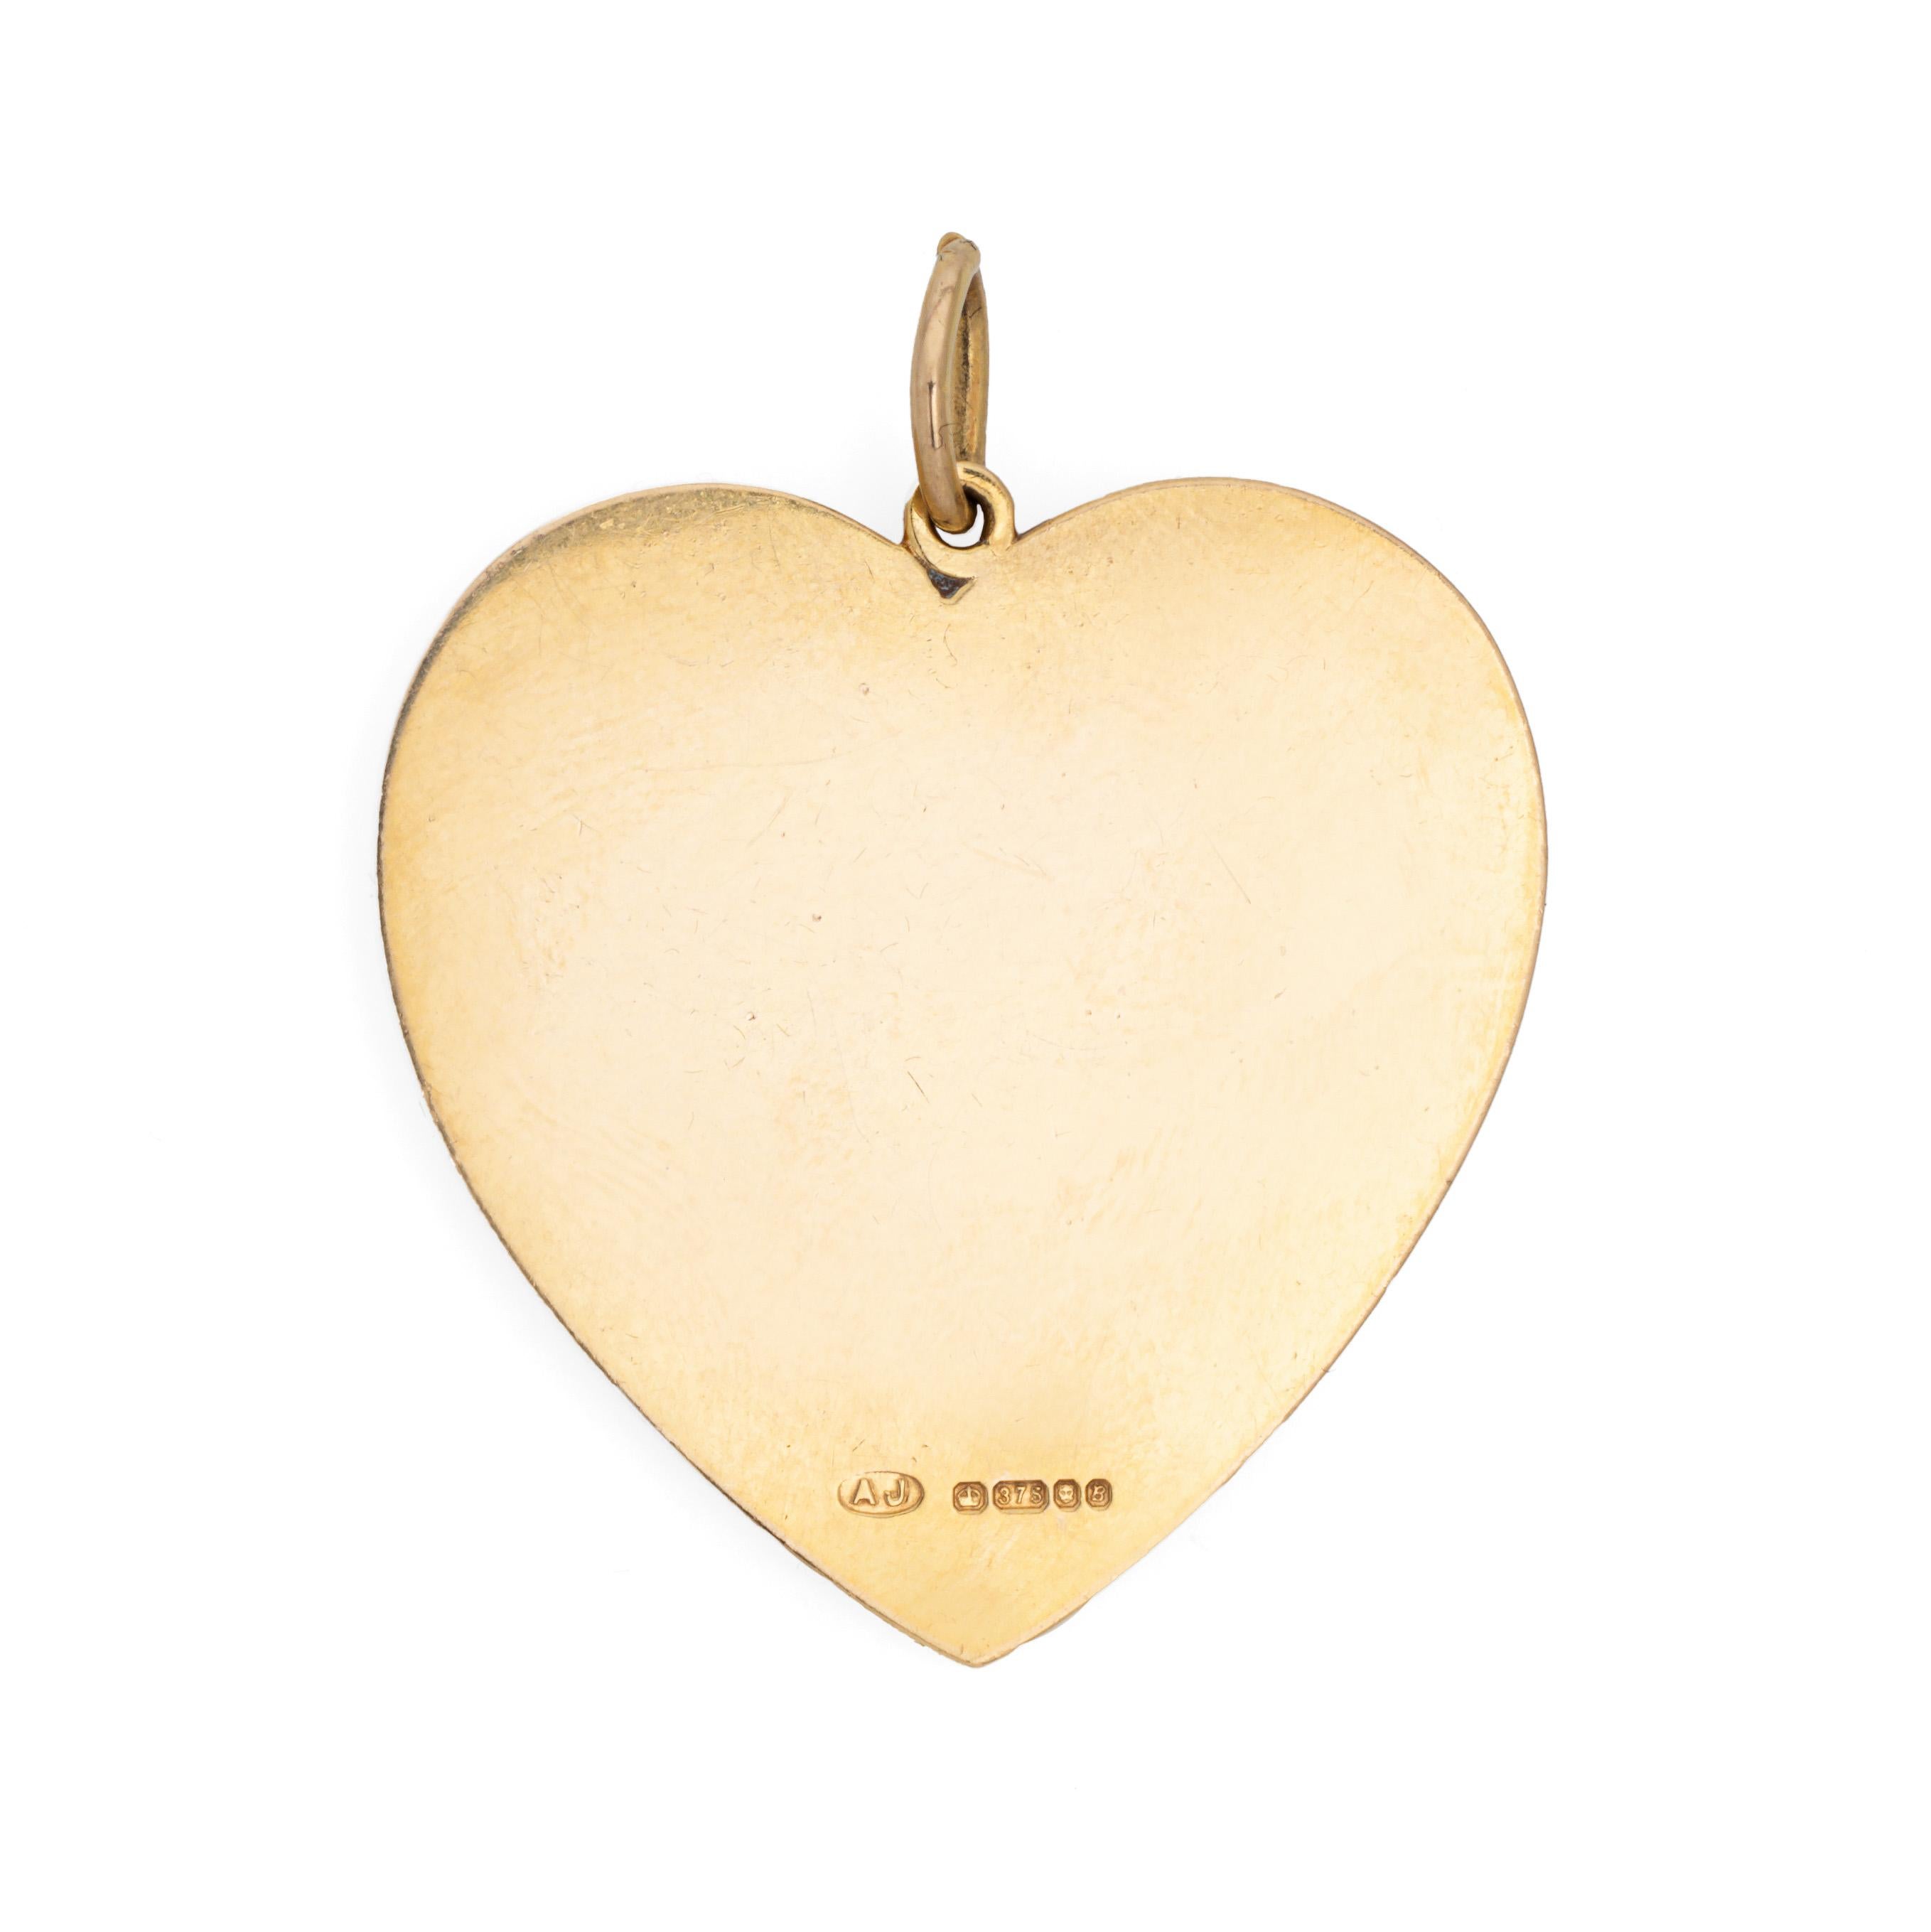 c1976 Vintage Heart Wedding Bell Pendant Large Charm 9k Gold UK Hallmarks   In Good Condition For Sale In Torrance, CA